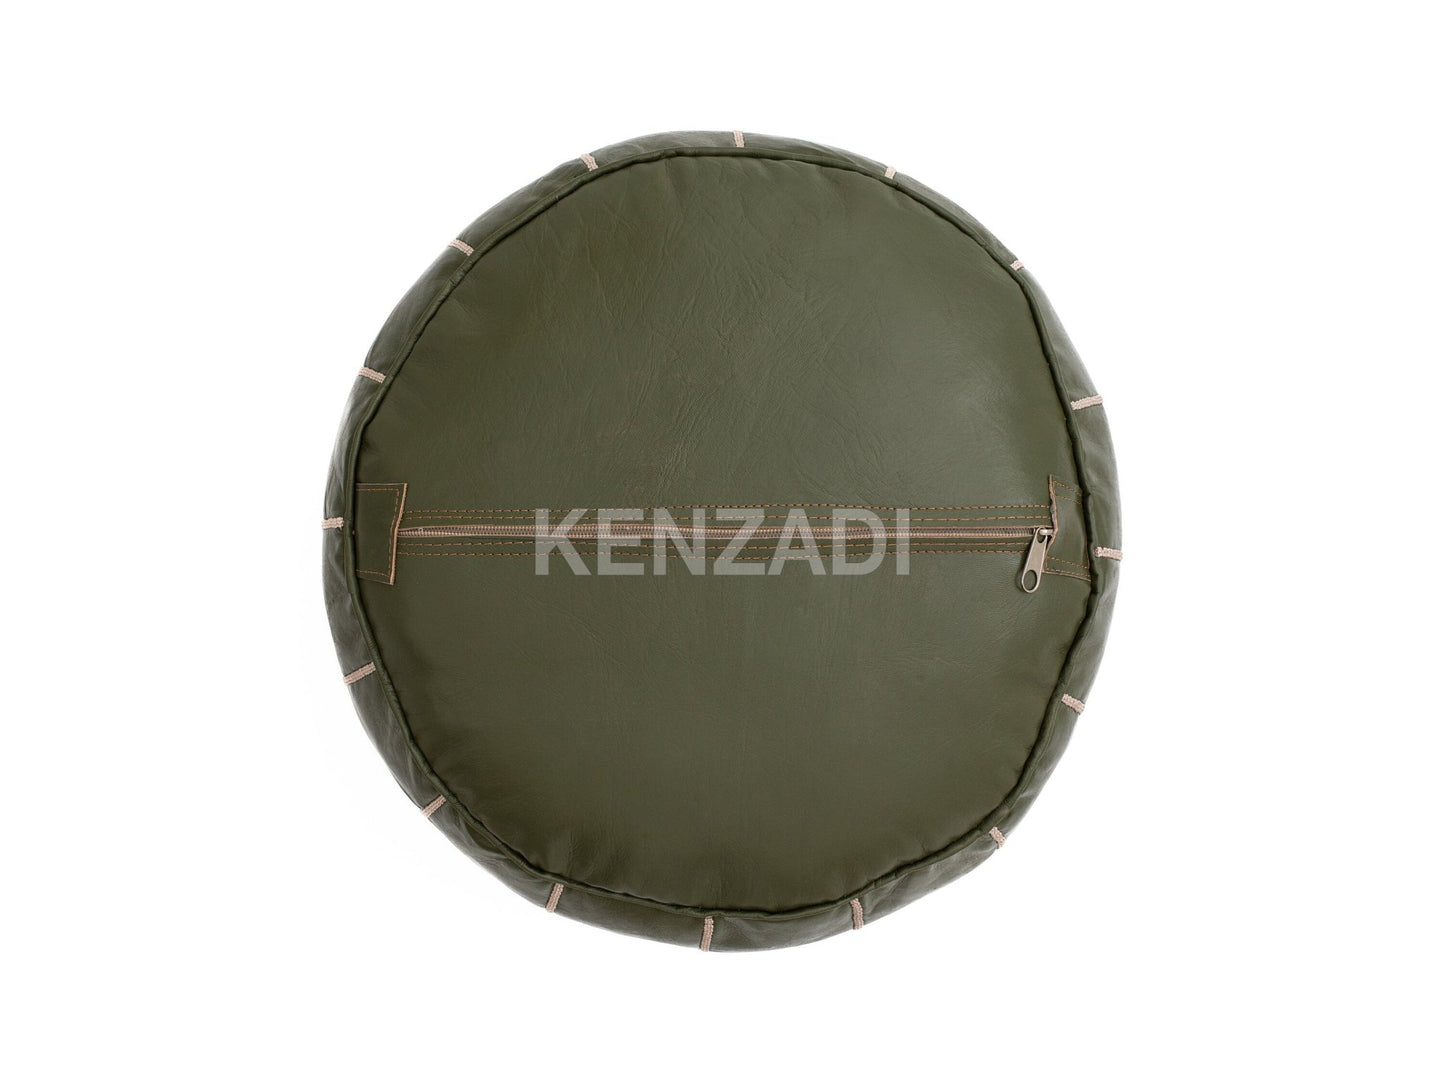 Authentic Moroccan round leather pouf in sewn TAN leather with crocodile green embroidery and beige accents. Handmade and versatile, perfect for any room in your home